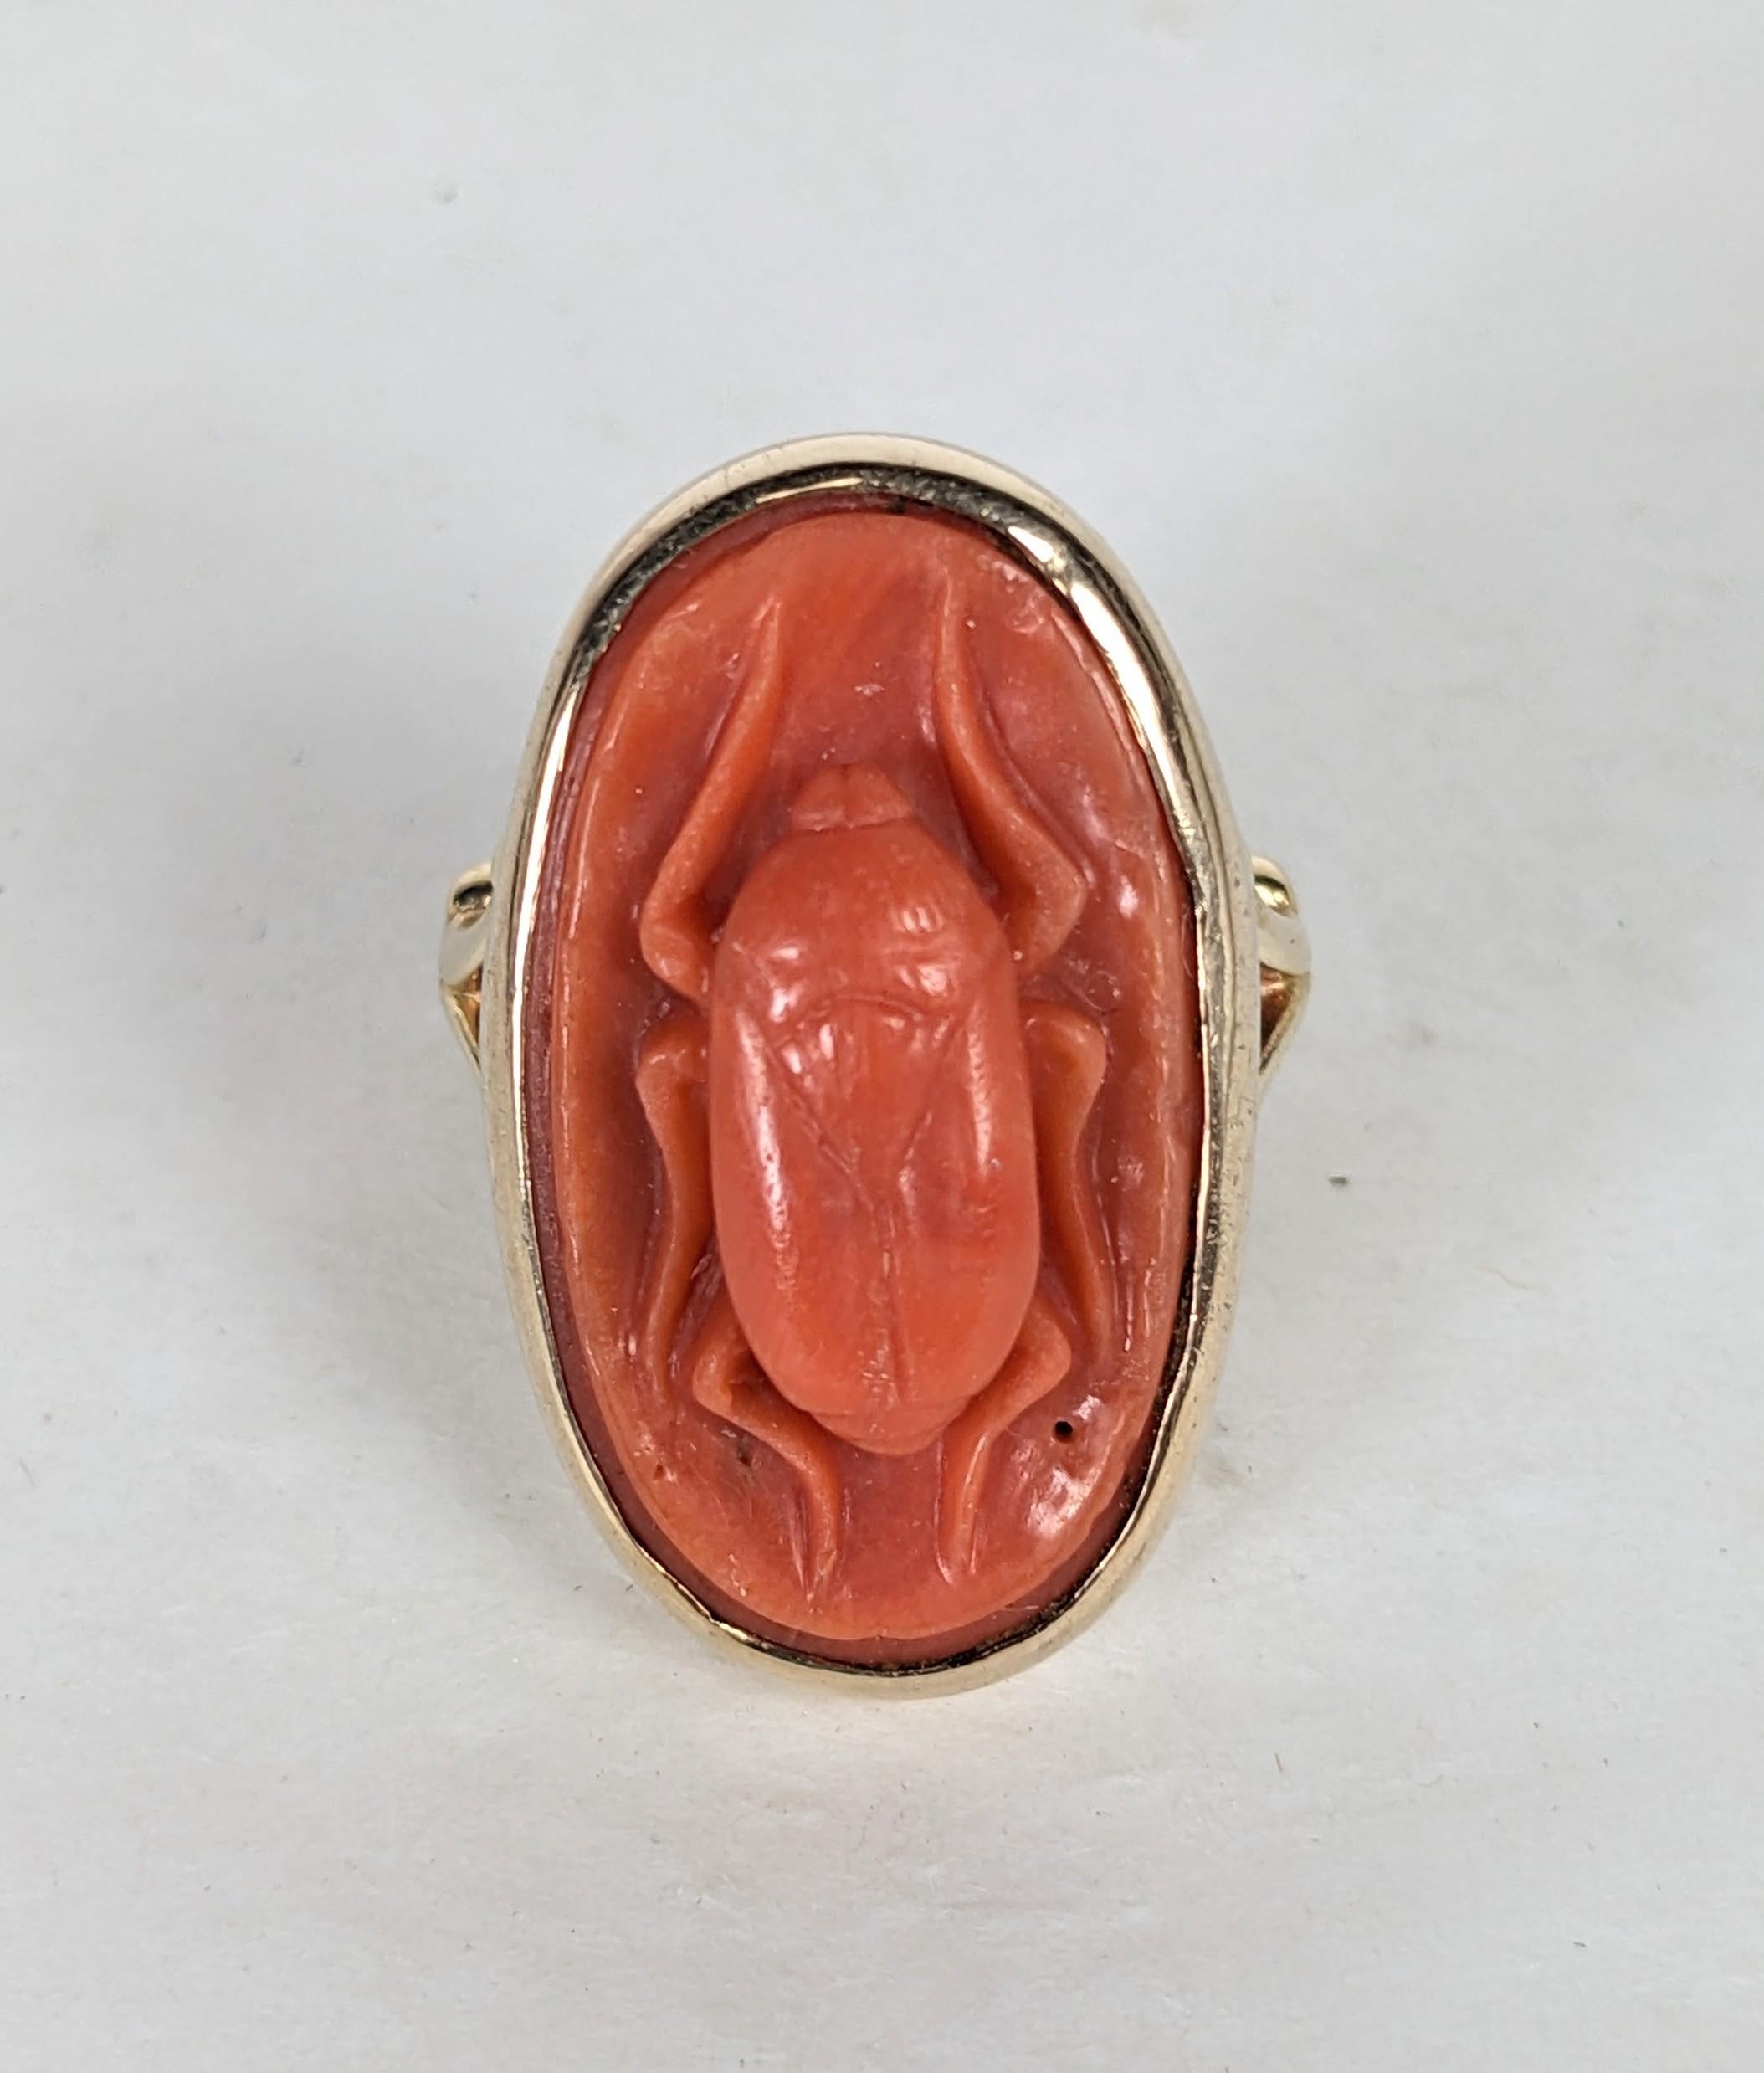 Unusual Coral Scarab Ring from the 1920's. Beautifully carved antique 19th Century Italian coral carving set in the early part of the 20th Century referencing the Egyptian Revival style. Large coral cameo in an oval setting in heavy 14k gold. Marked